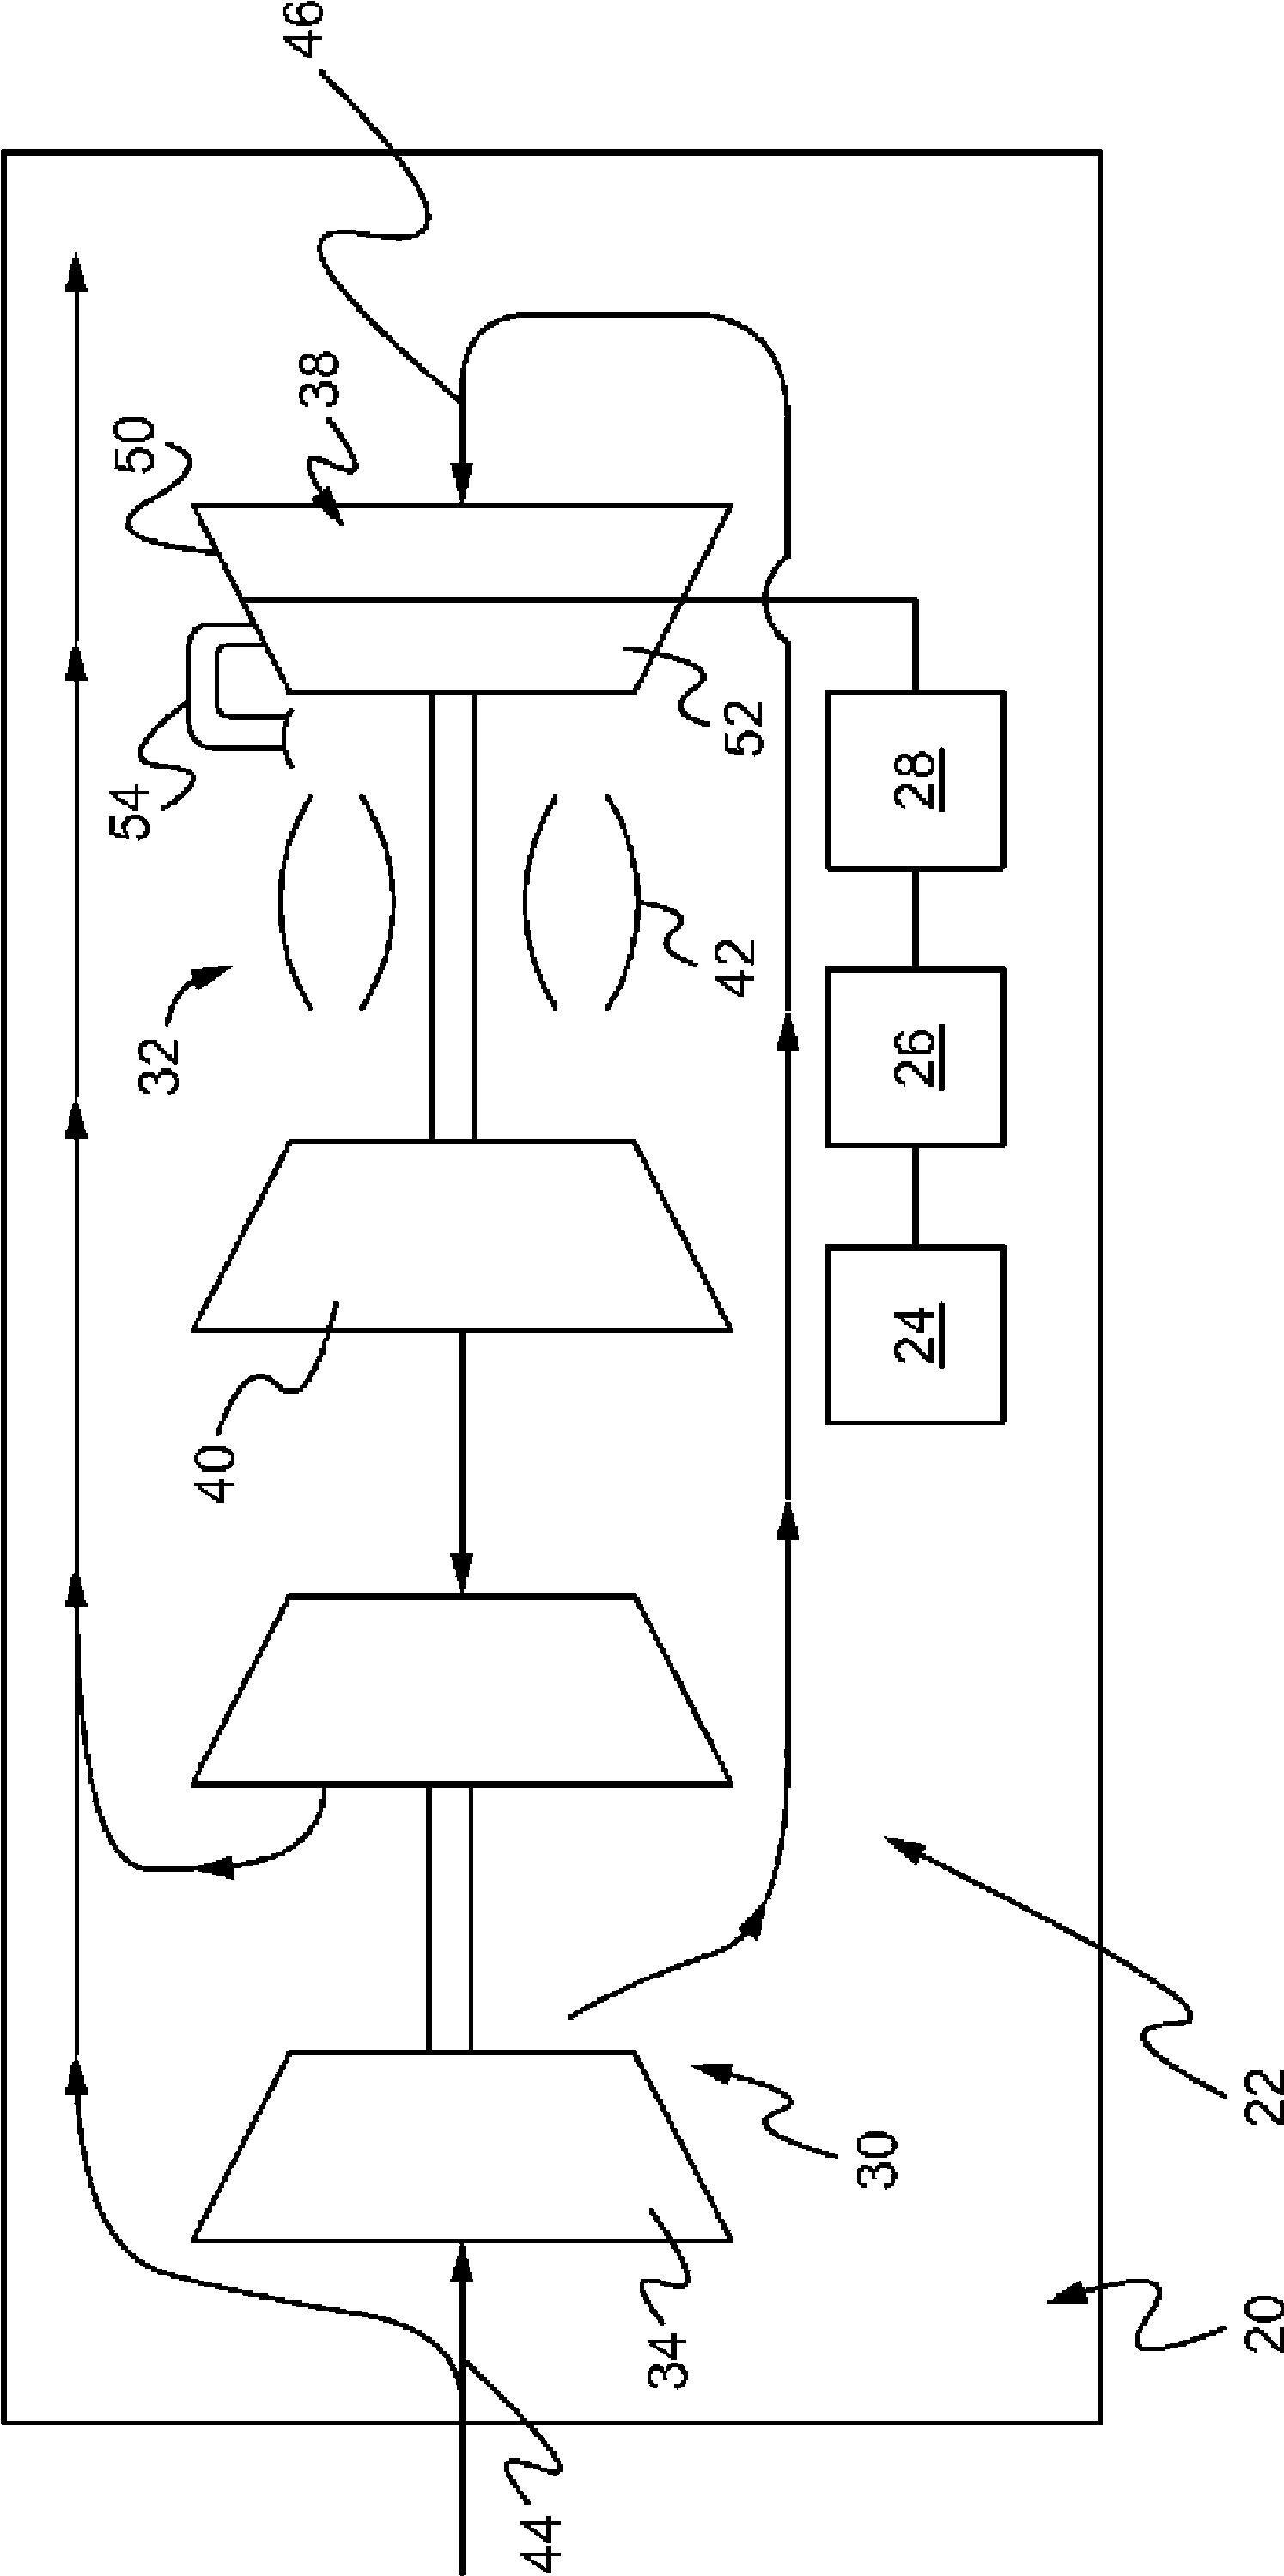 Gas turbine engine with variable overall pressure ratio